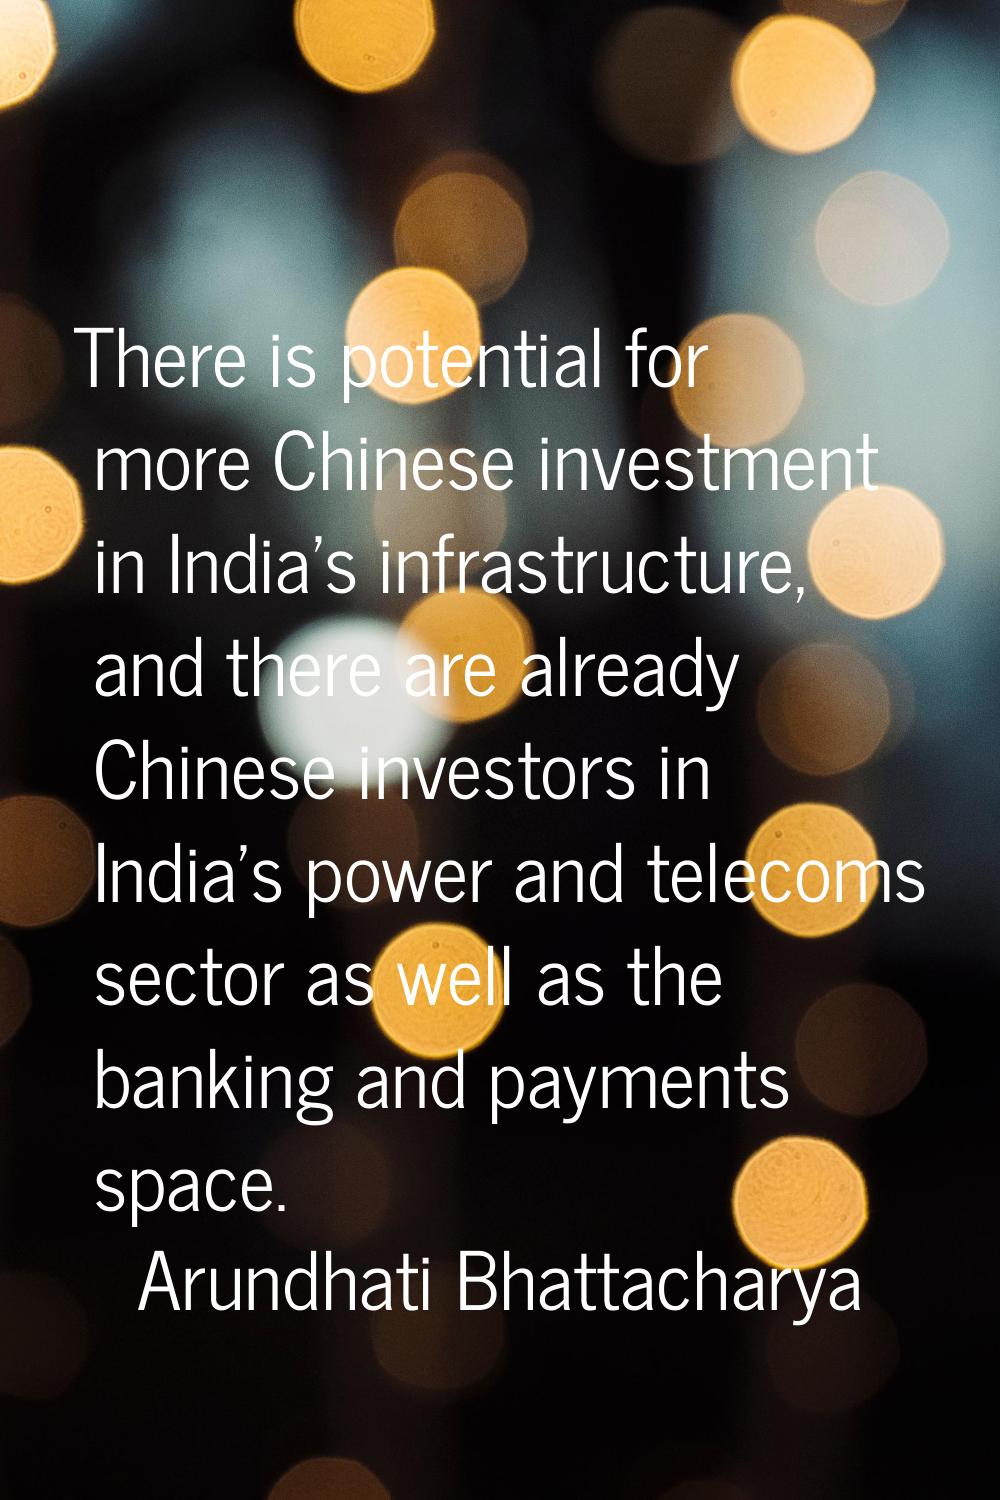 There is potential for more Chinese investment in India's infrastructure, and there are already Chi